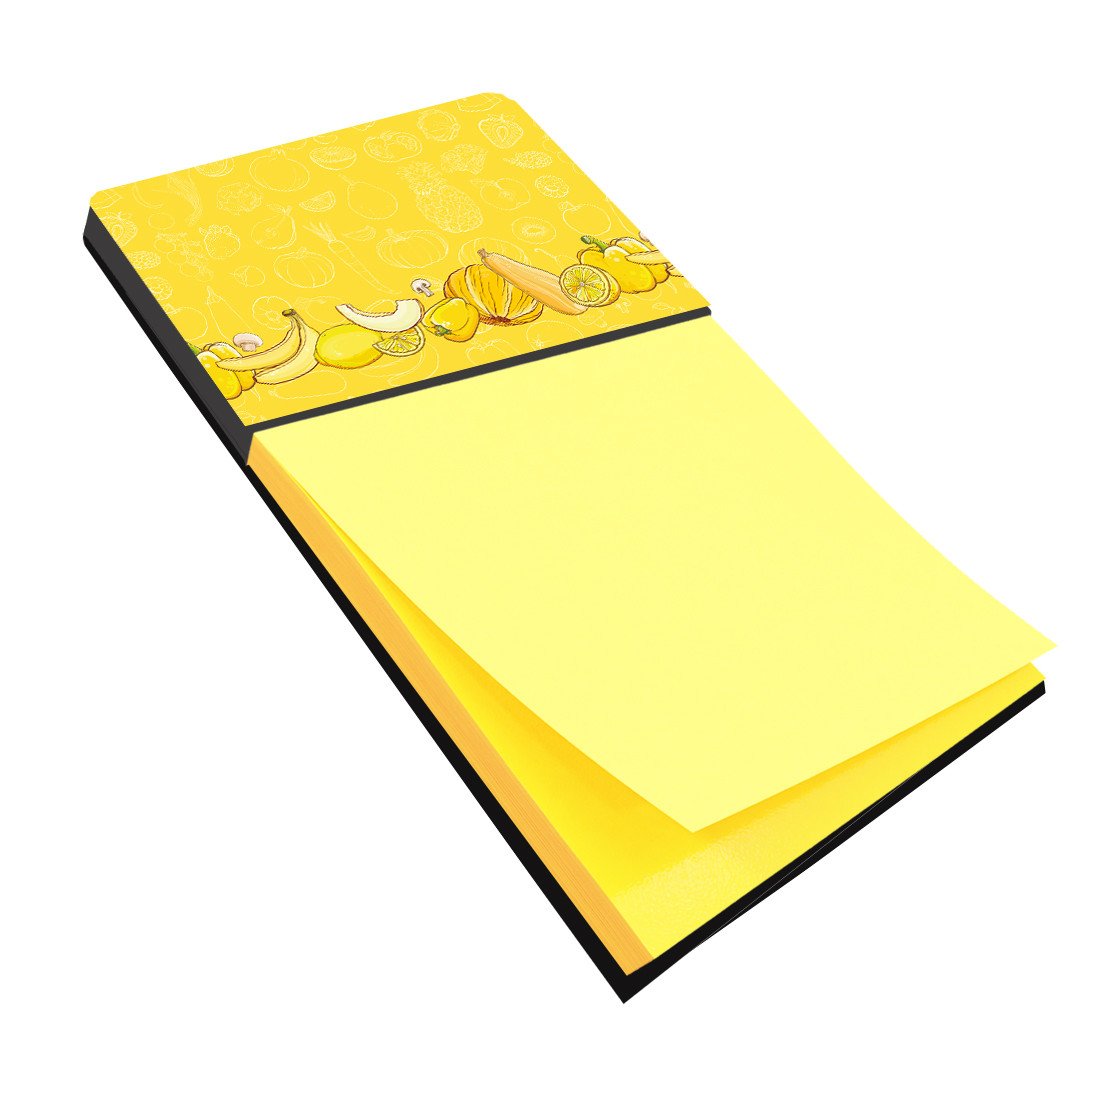 Fruits and Vegetables in Yellow Sticky Note Holder BB5134SN by Caroline's Treasures